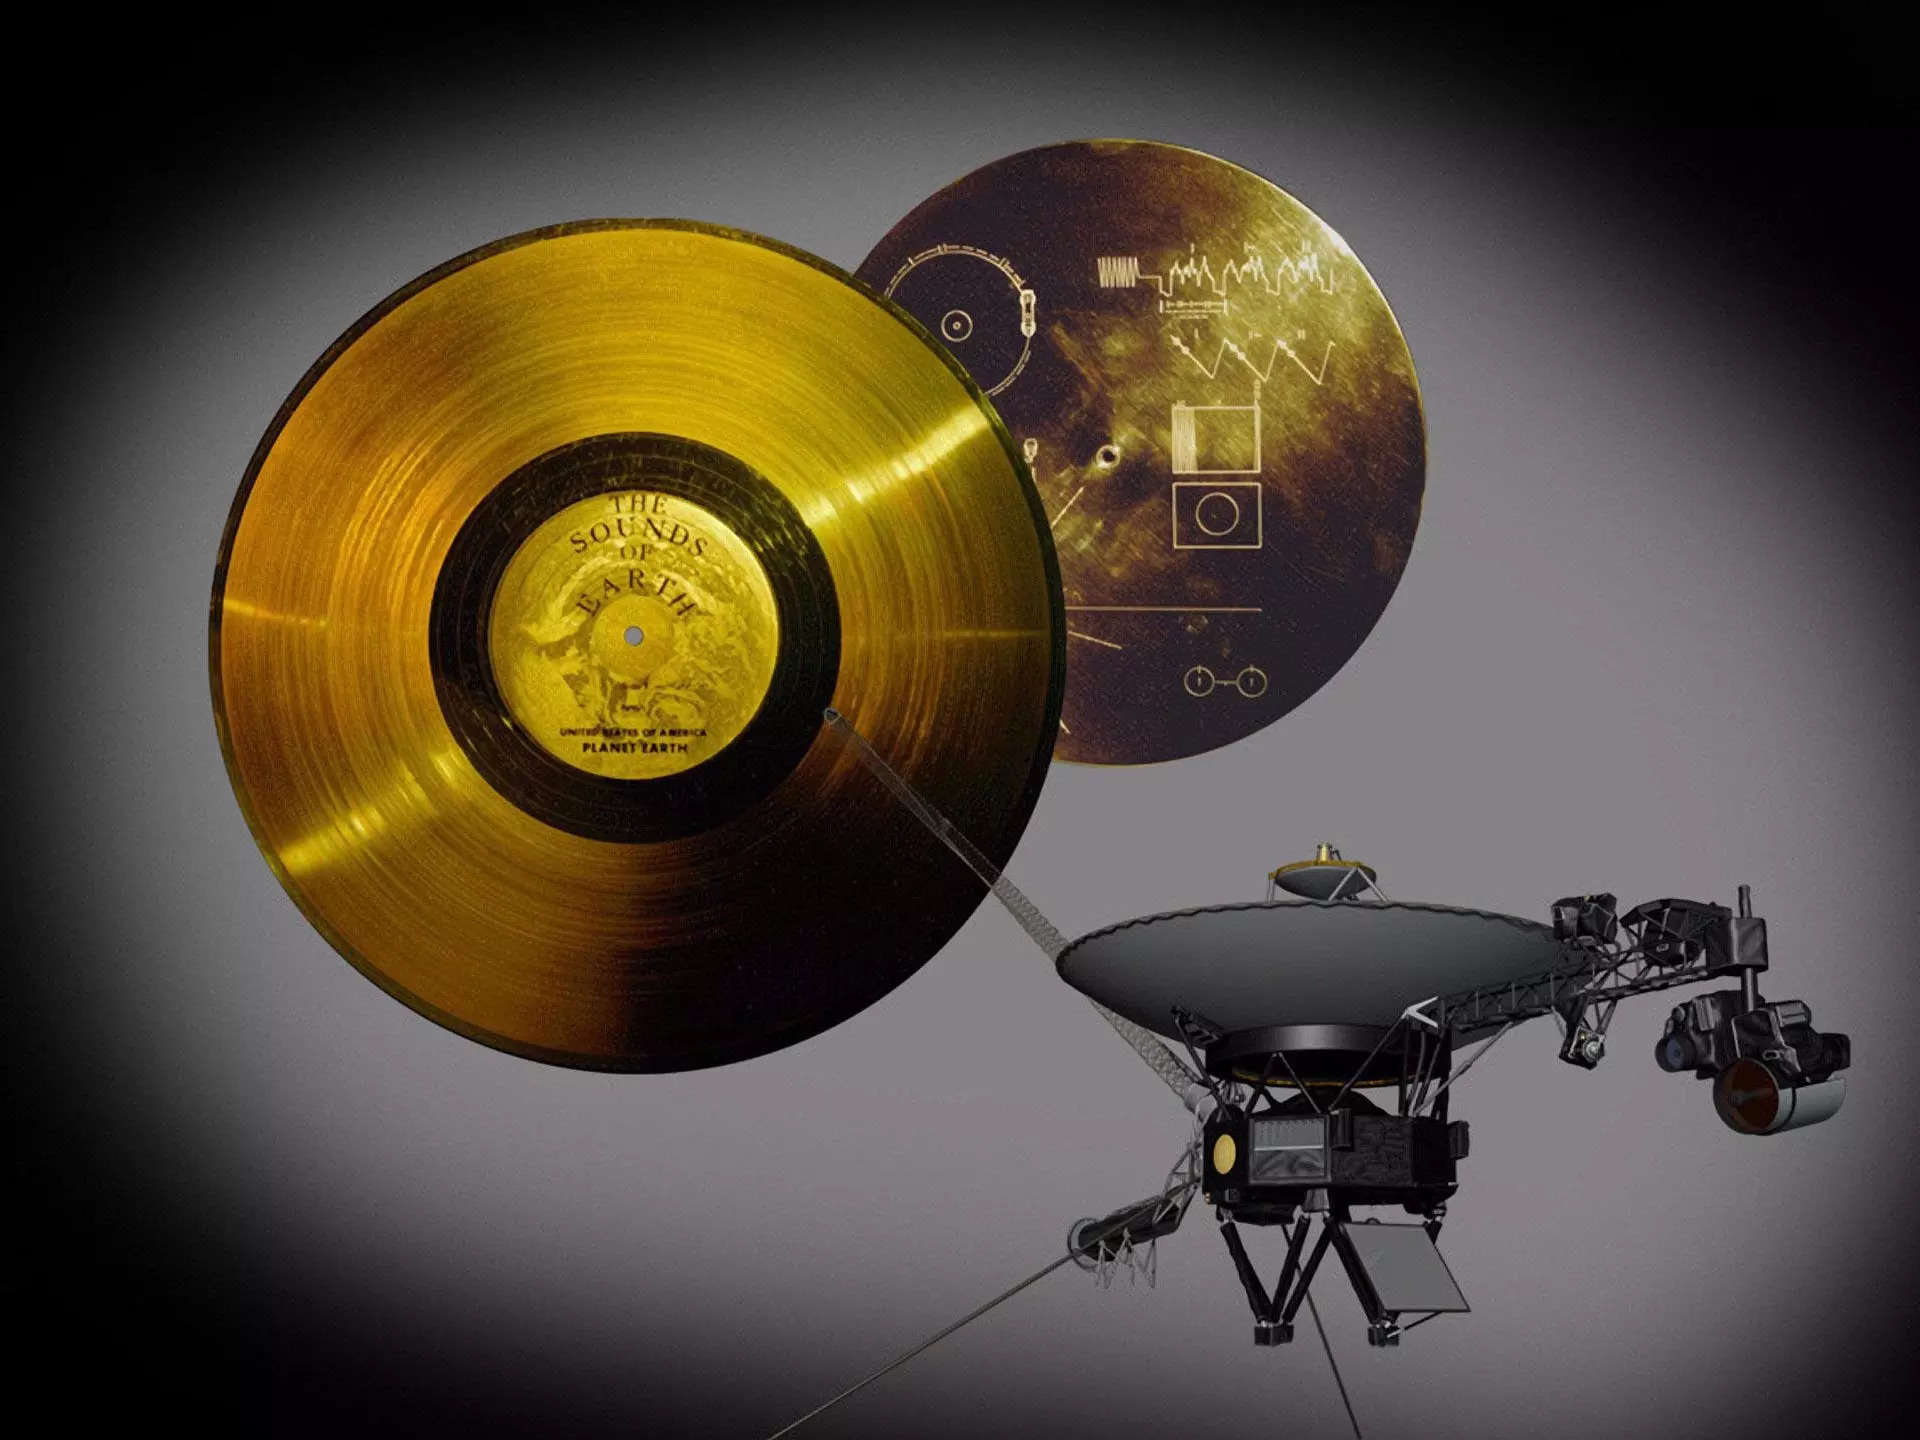 NASA hopes to get the Voyager spacecraft to their 50th anniversary with clever engineering and difficult choices